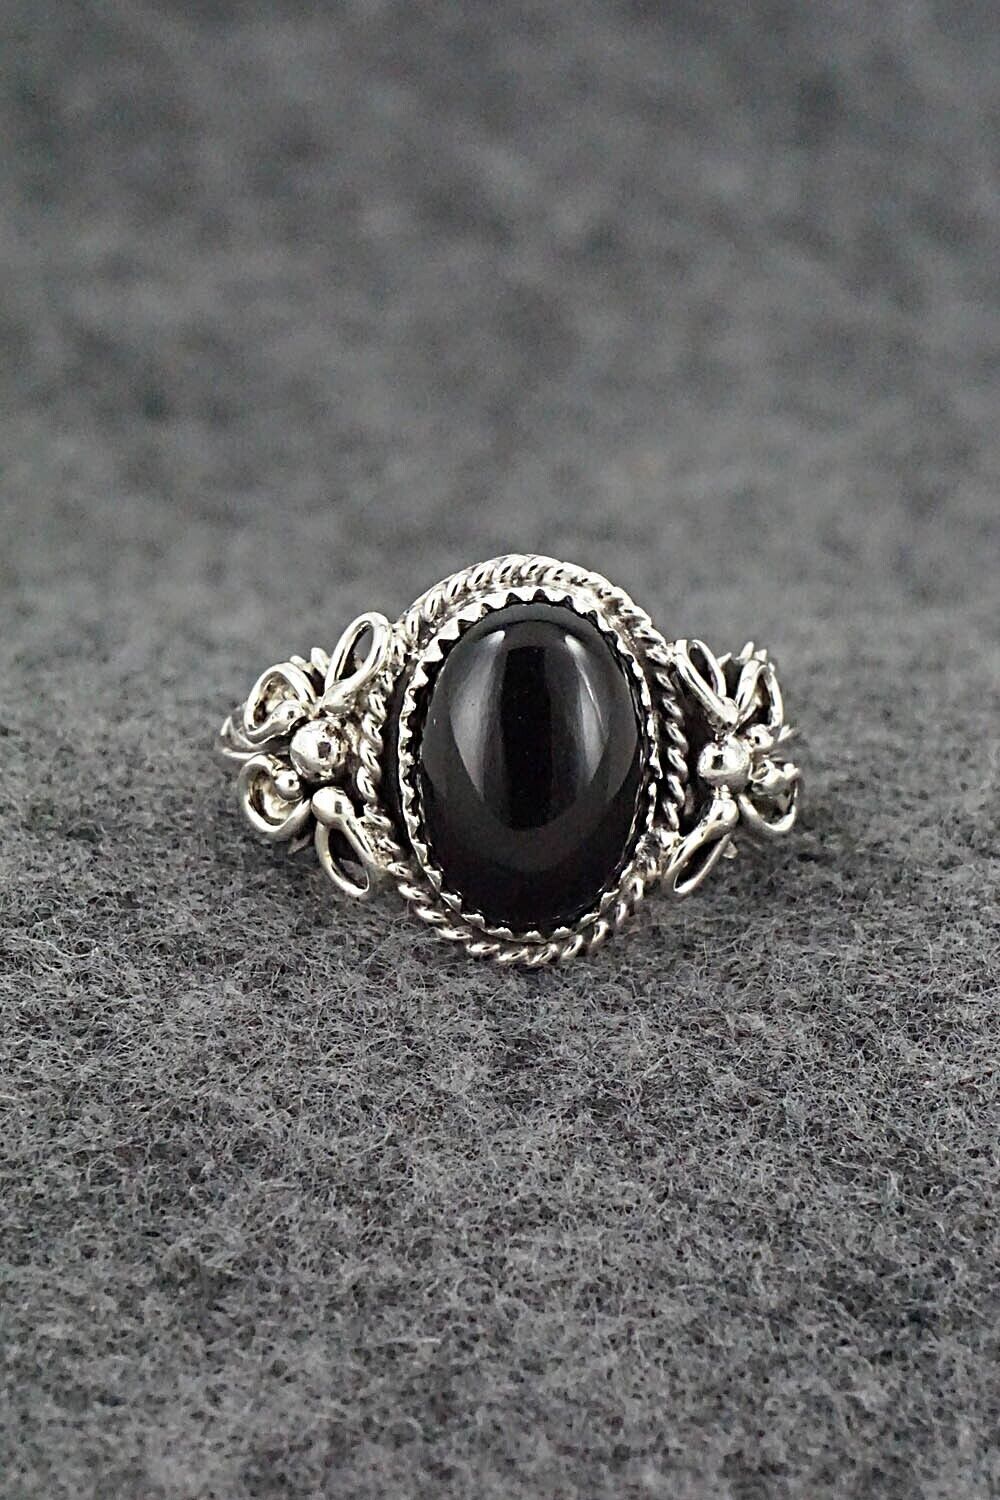 Onyx & Sterling Silver Ring - Jeannette Saunders - Size 10.5